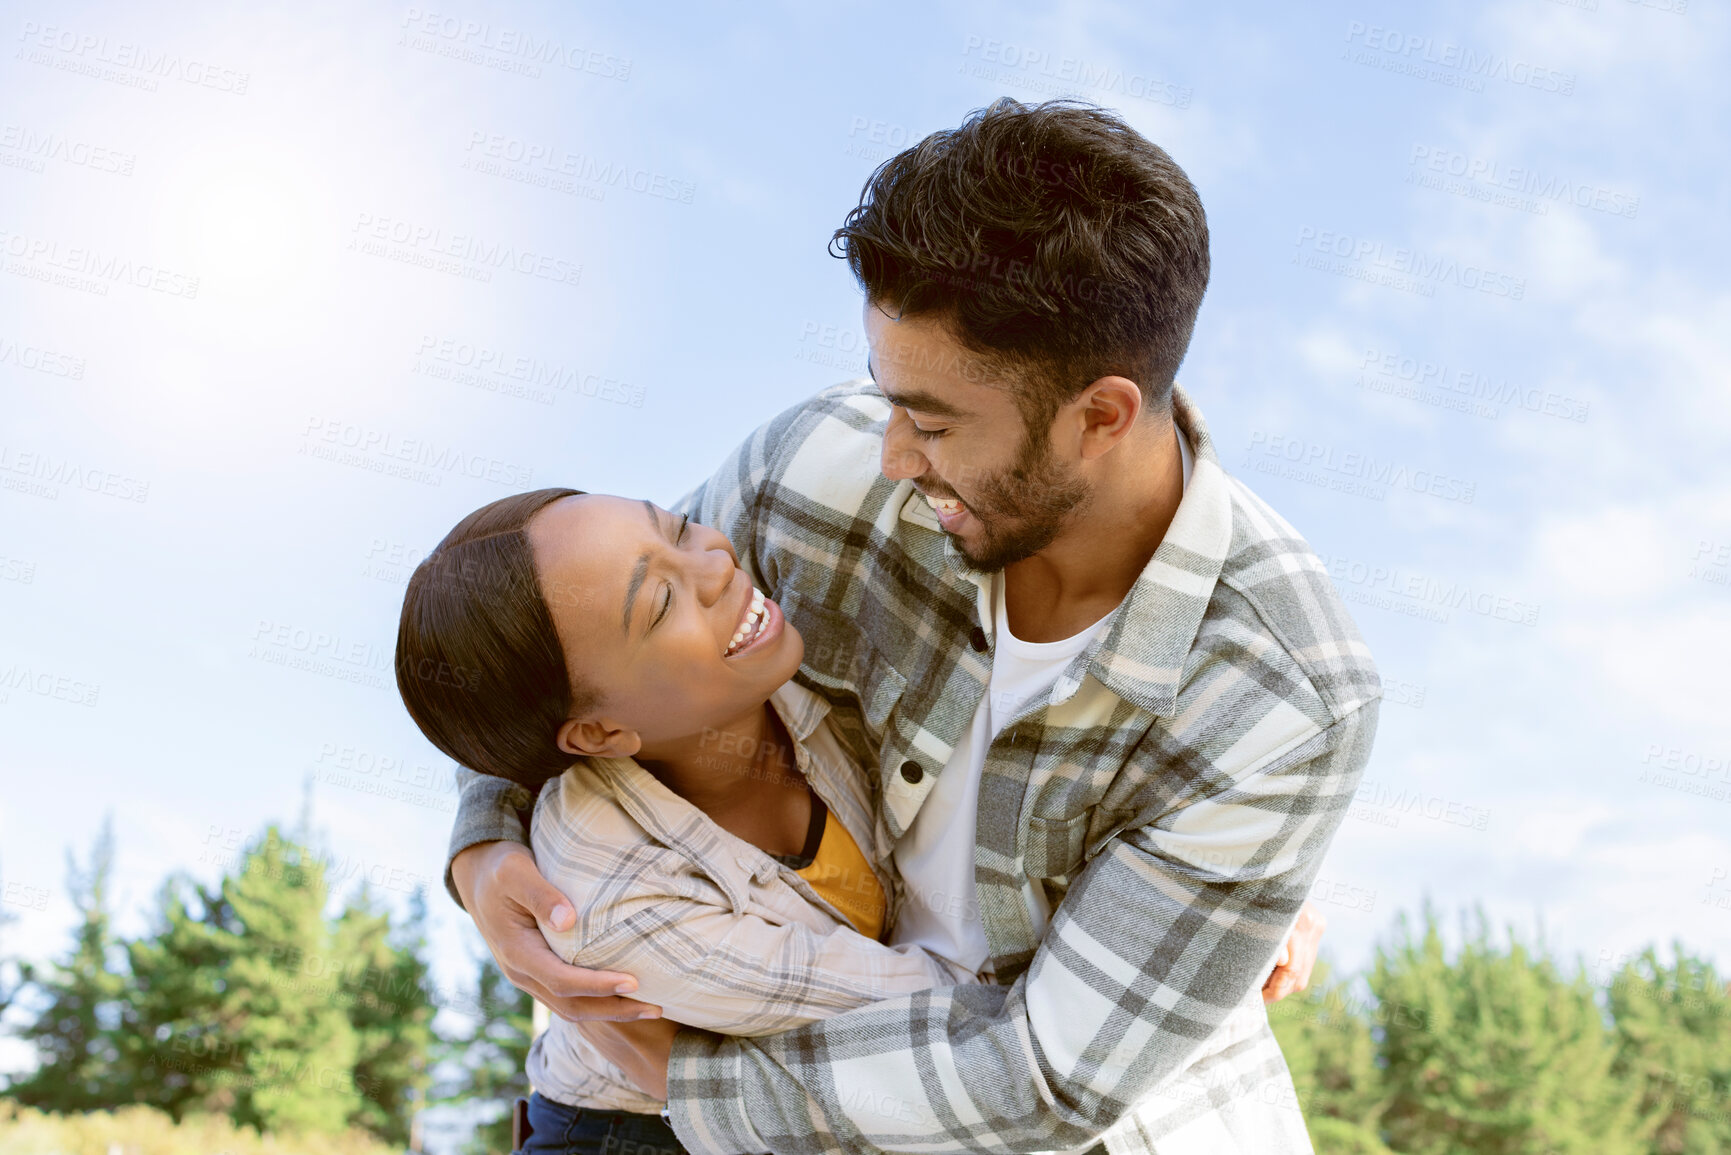 Buy stock photo Sky, diversity and nature couple hug on outdoor quality time together, hiking adventure or forest bonding journey. Peace, freedom and love for black woman, man or fun excited people trekking in woods